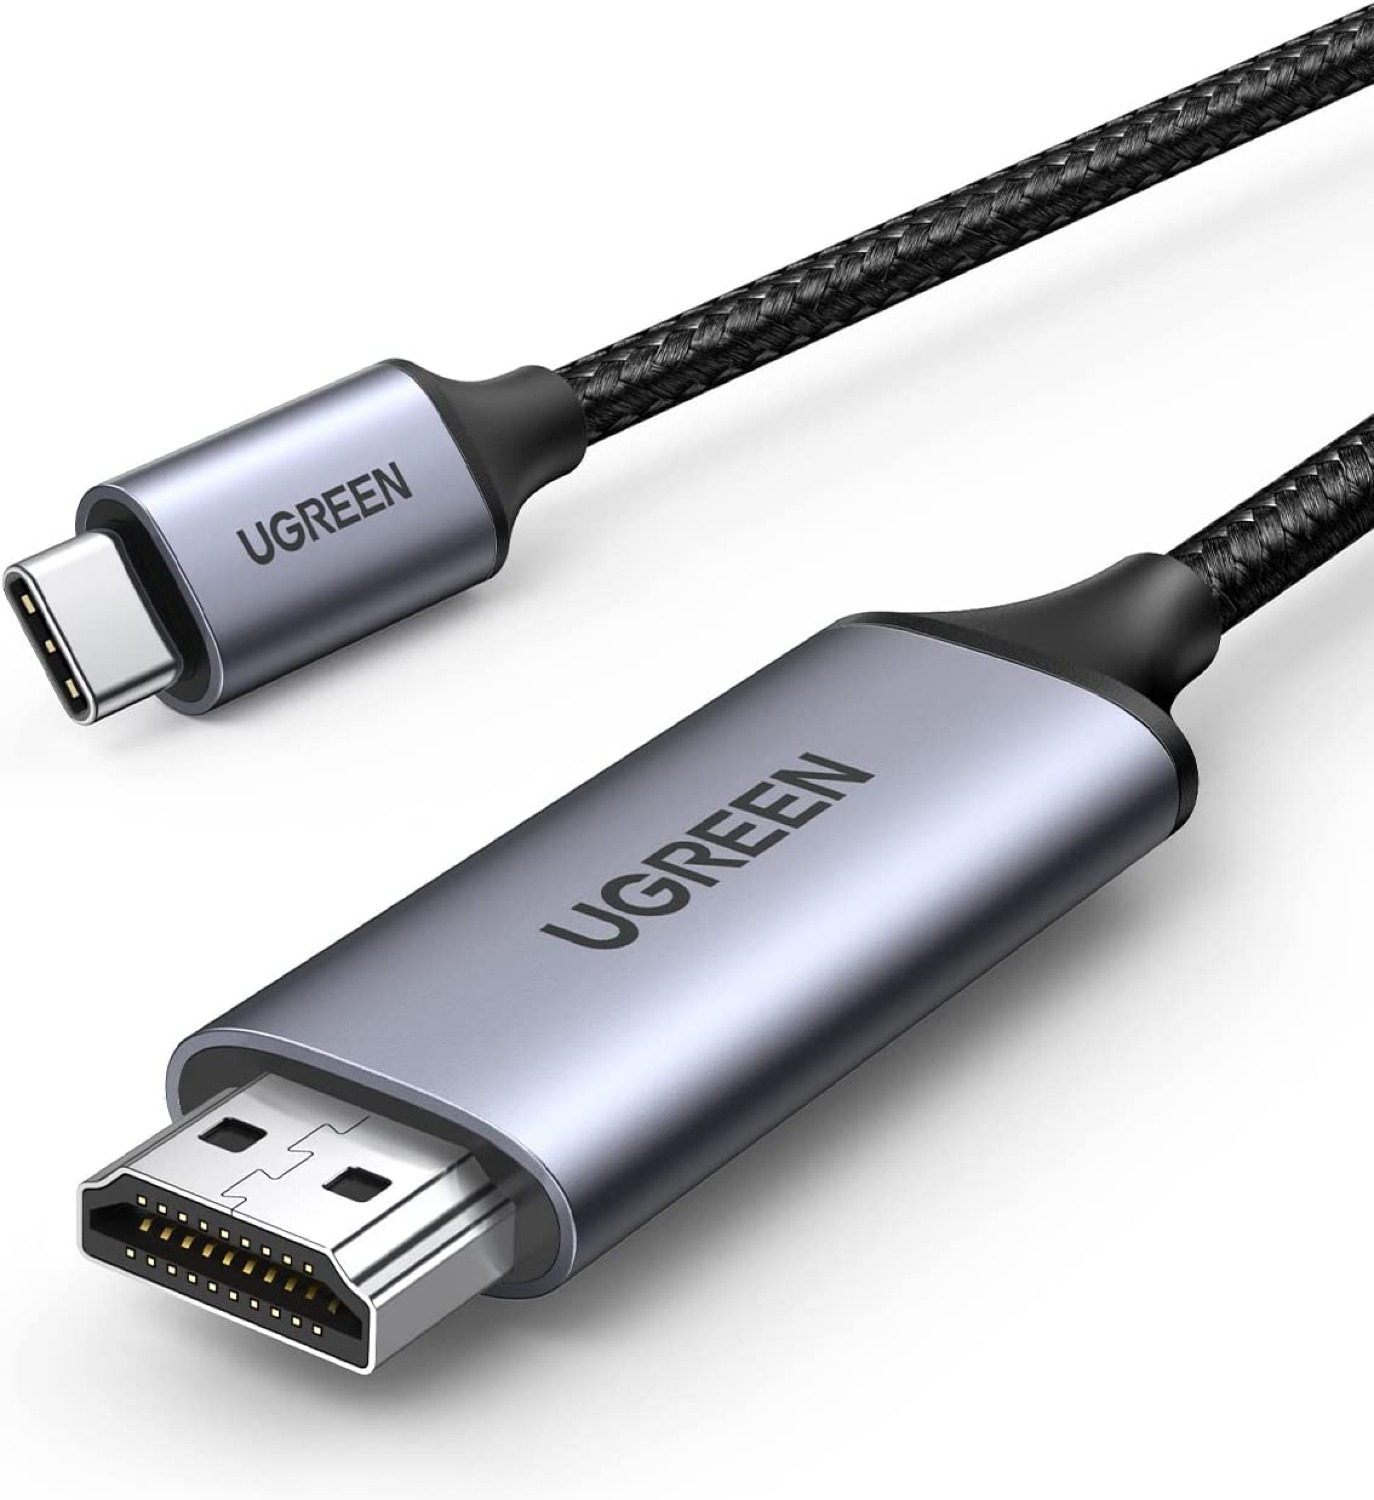 Prime Exclusive: UGREEN USB C to HDMI Cable 4K 60Hz $11.96 & More + Free Shipping w/ Prime or $25+